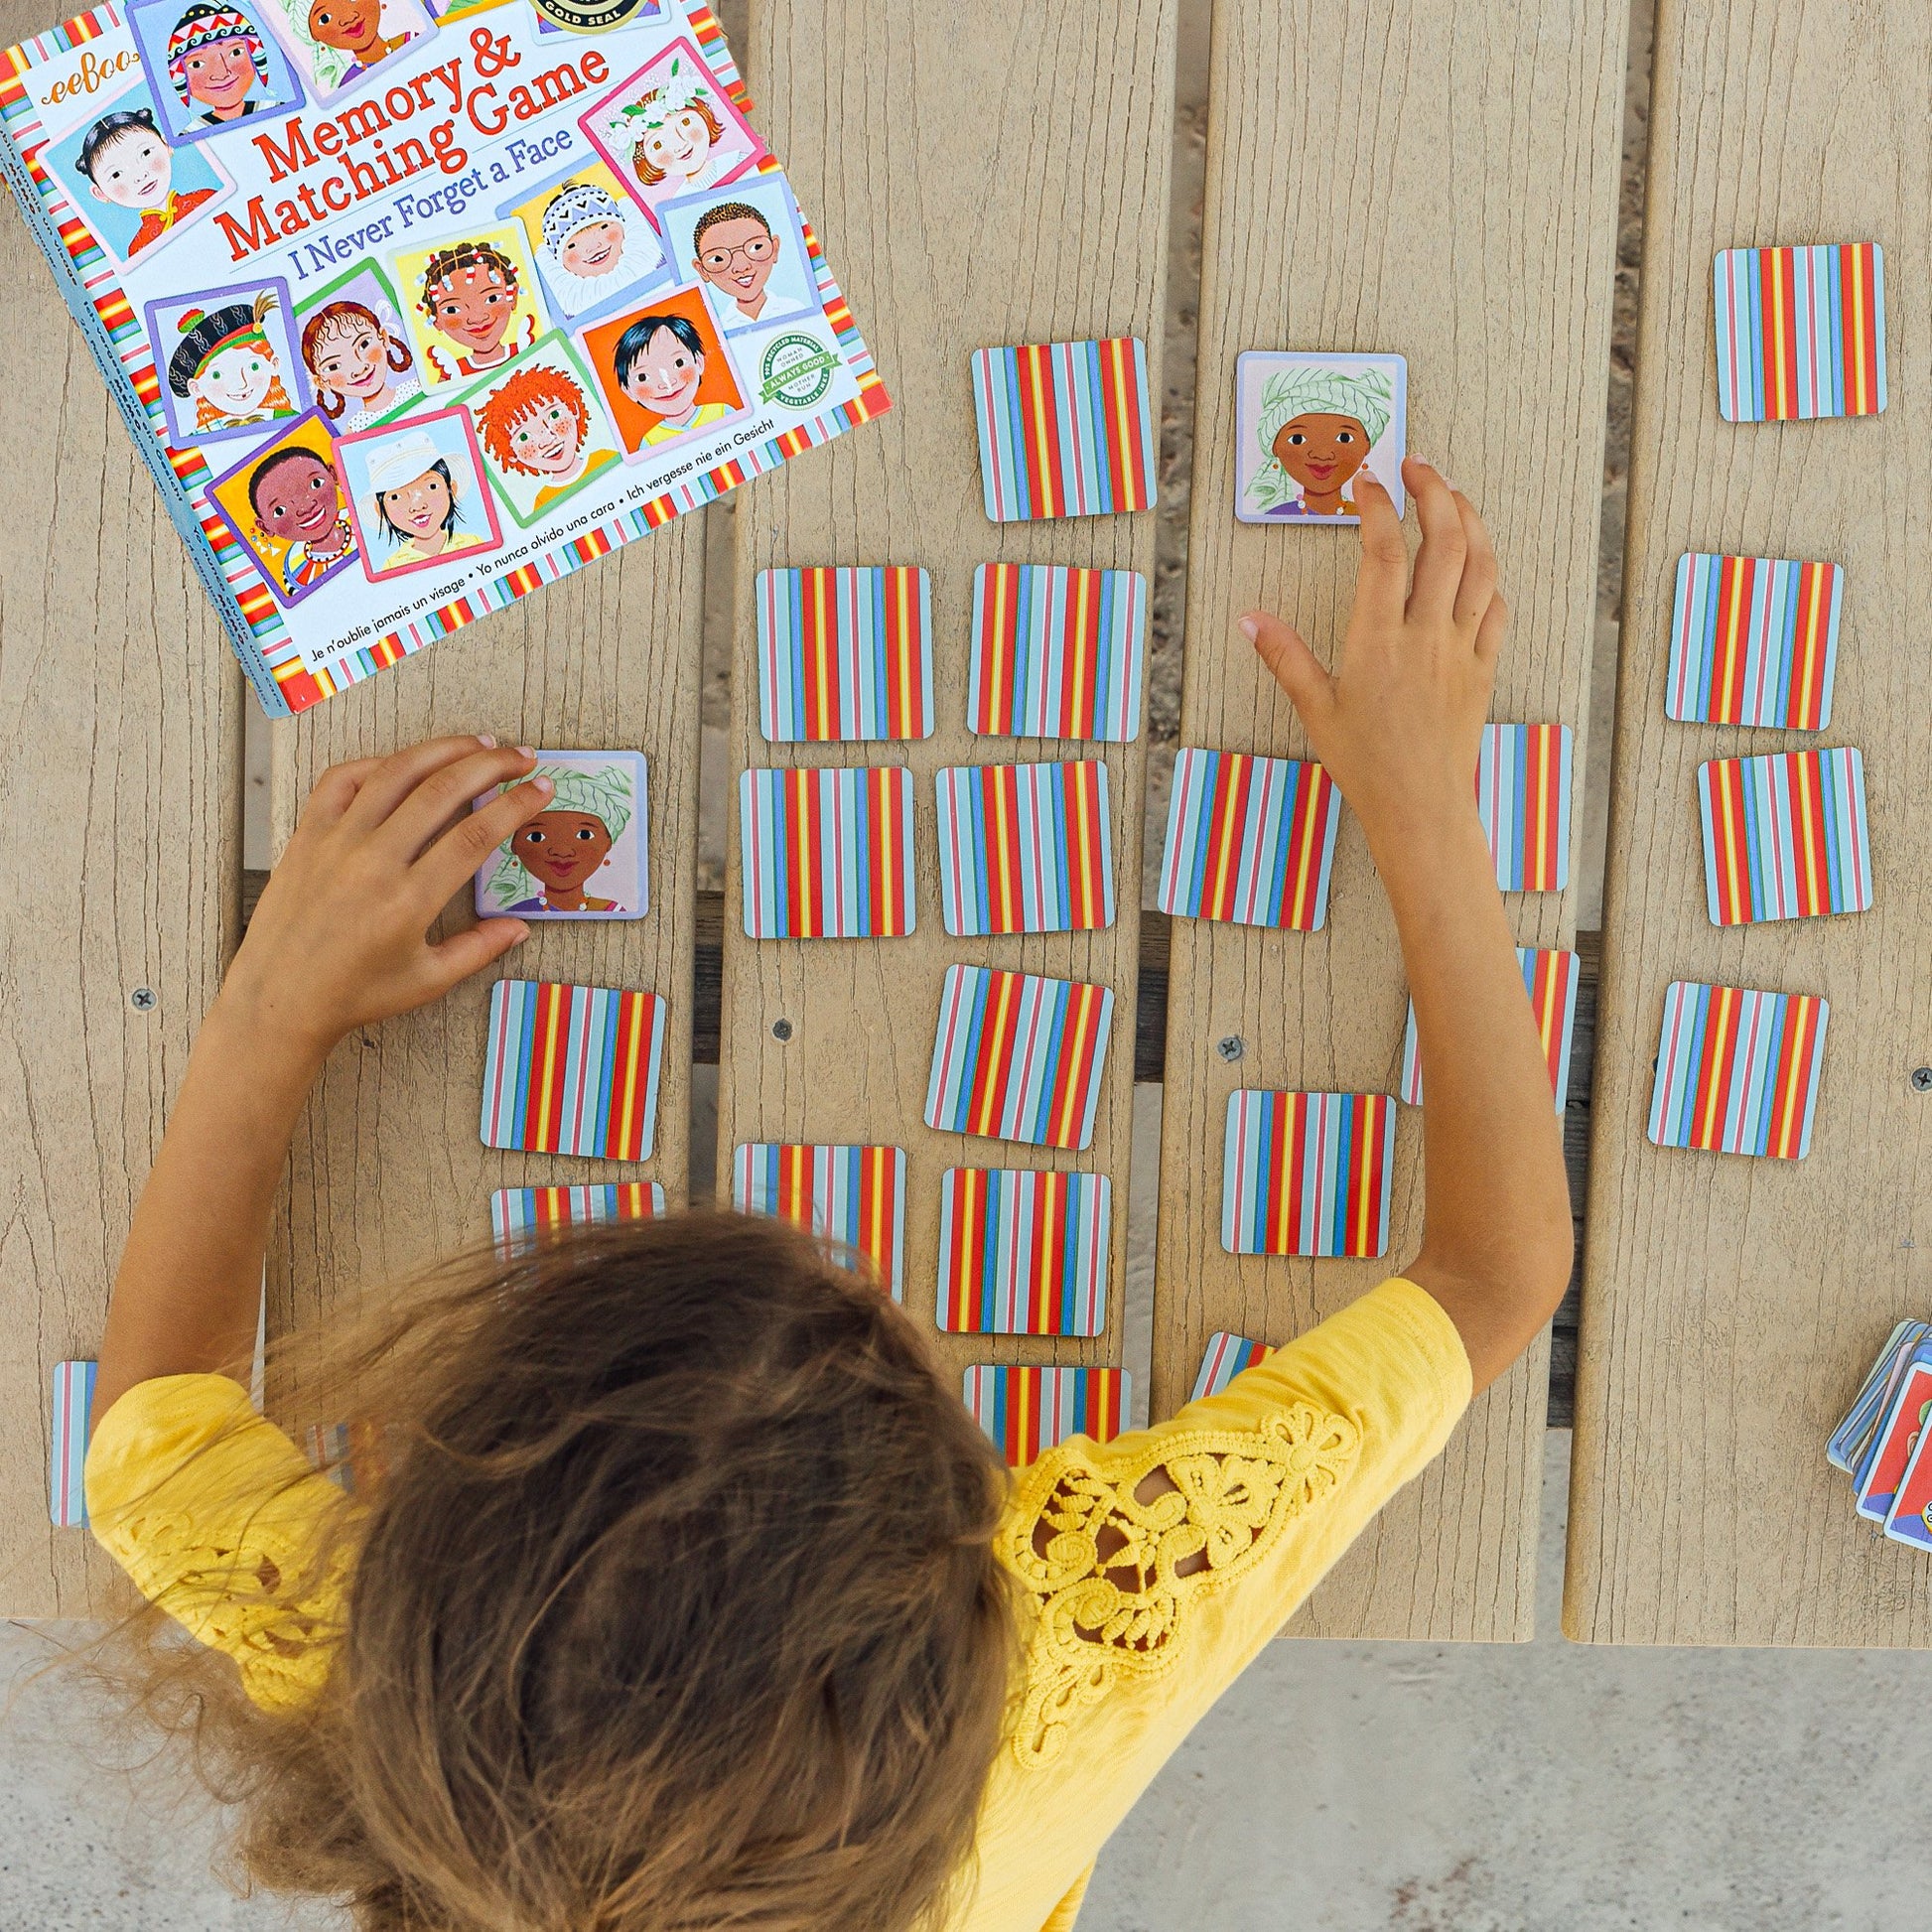 I Never Forget a Face Award Winning Memory and Matching Game by eeBoo | Gifts for Pre School Kids 3+